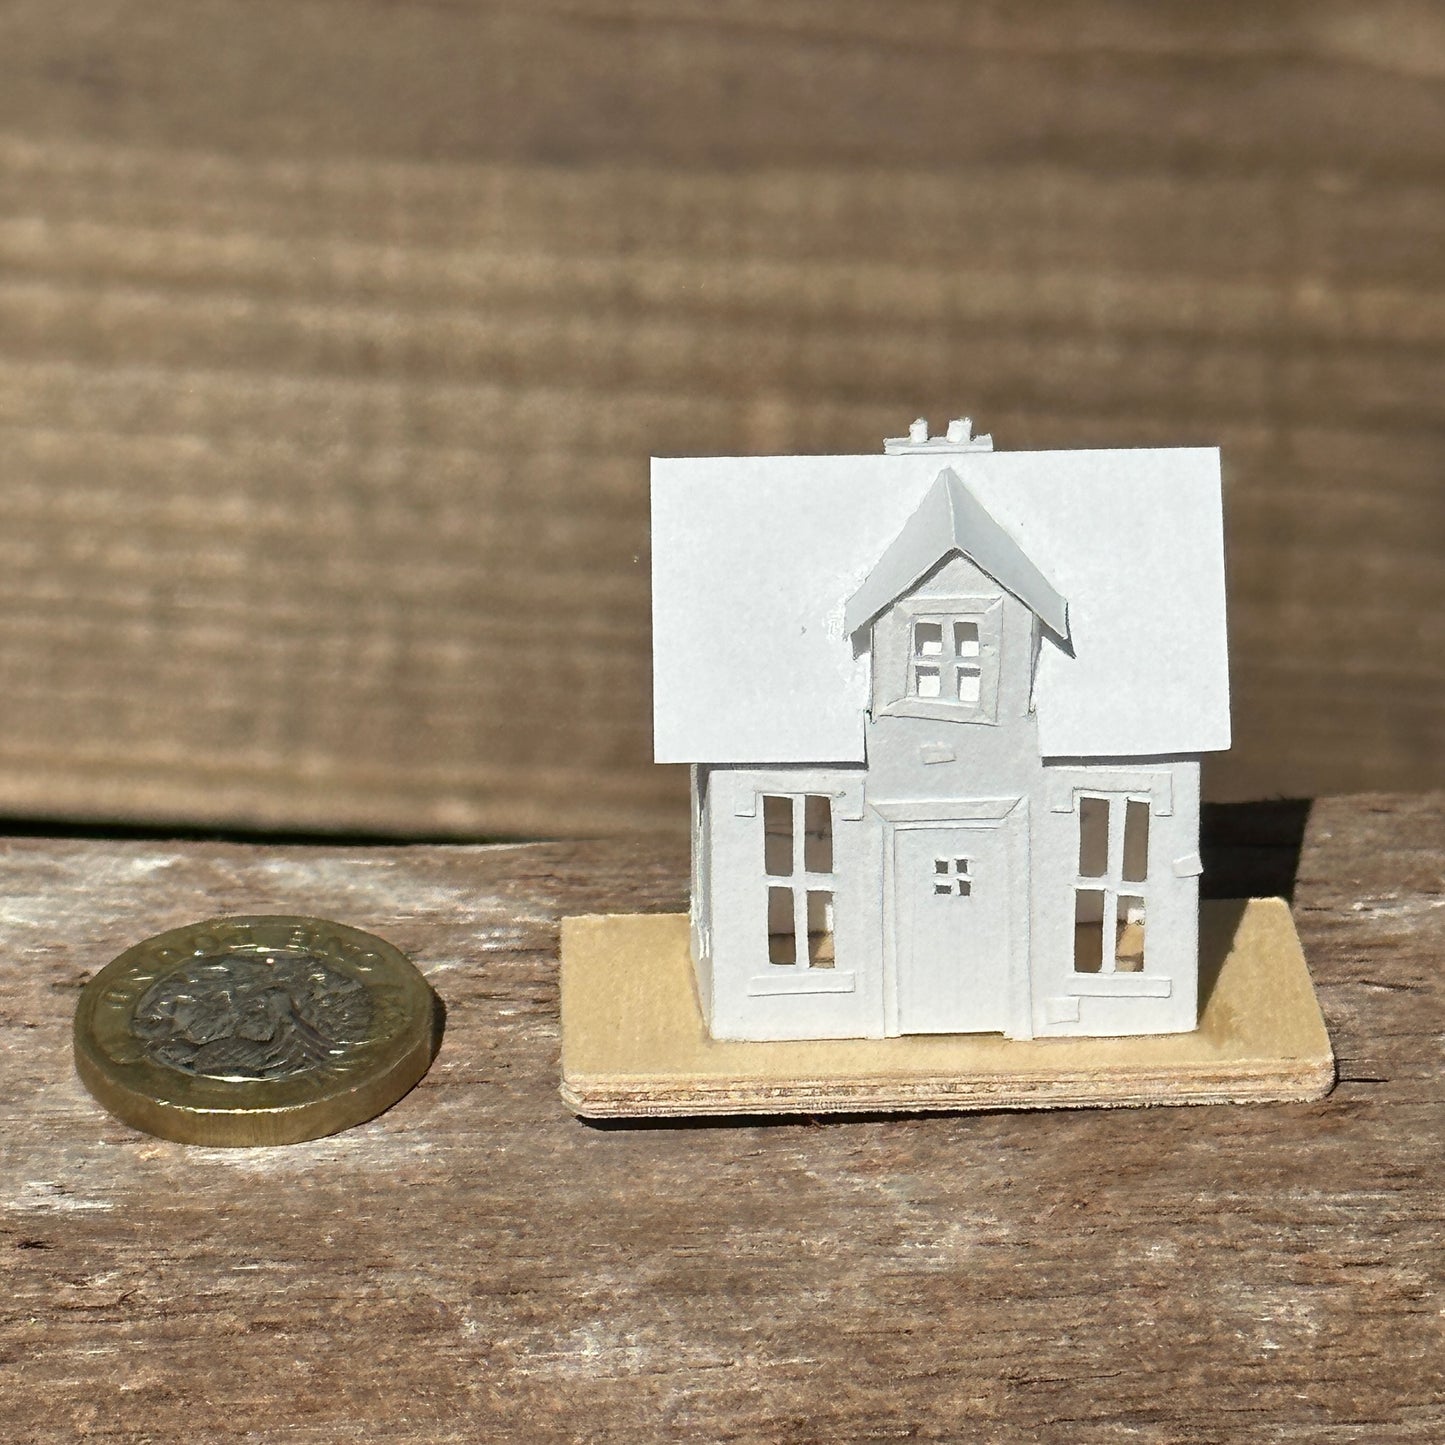  Miniature handmade paper house next to coin for scale